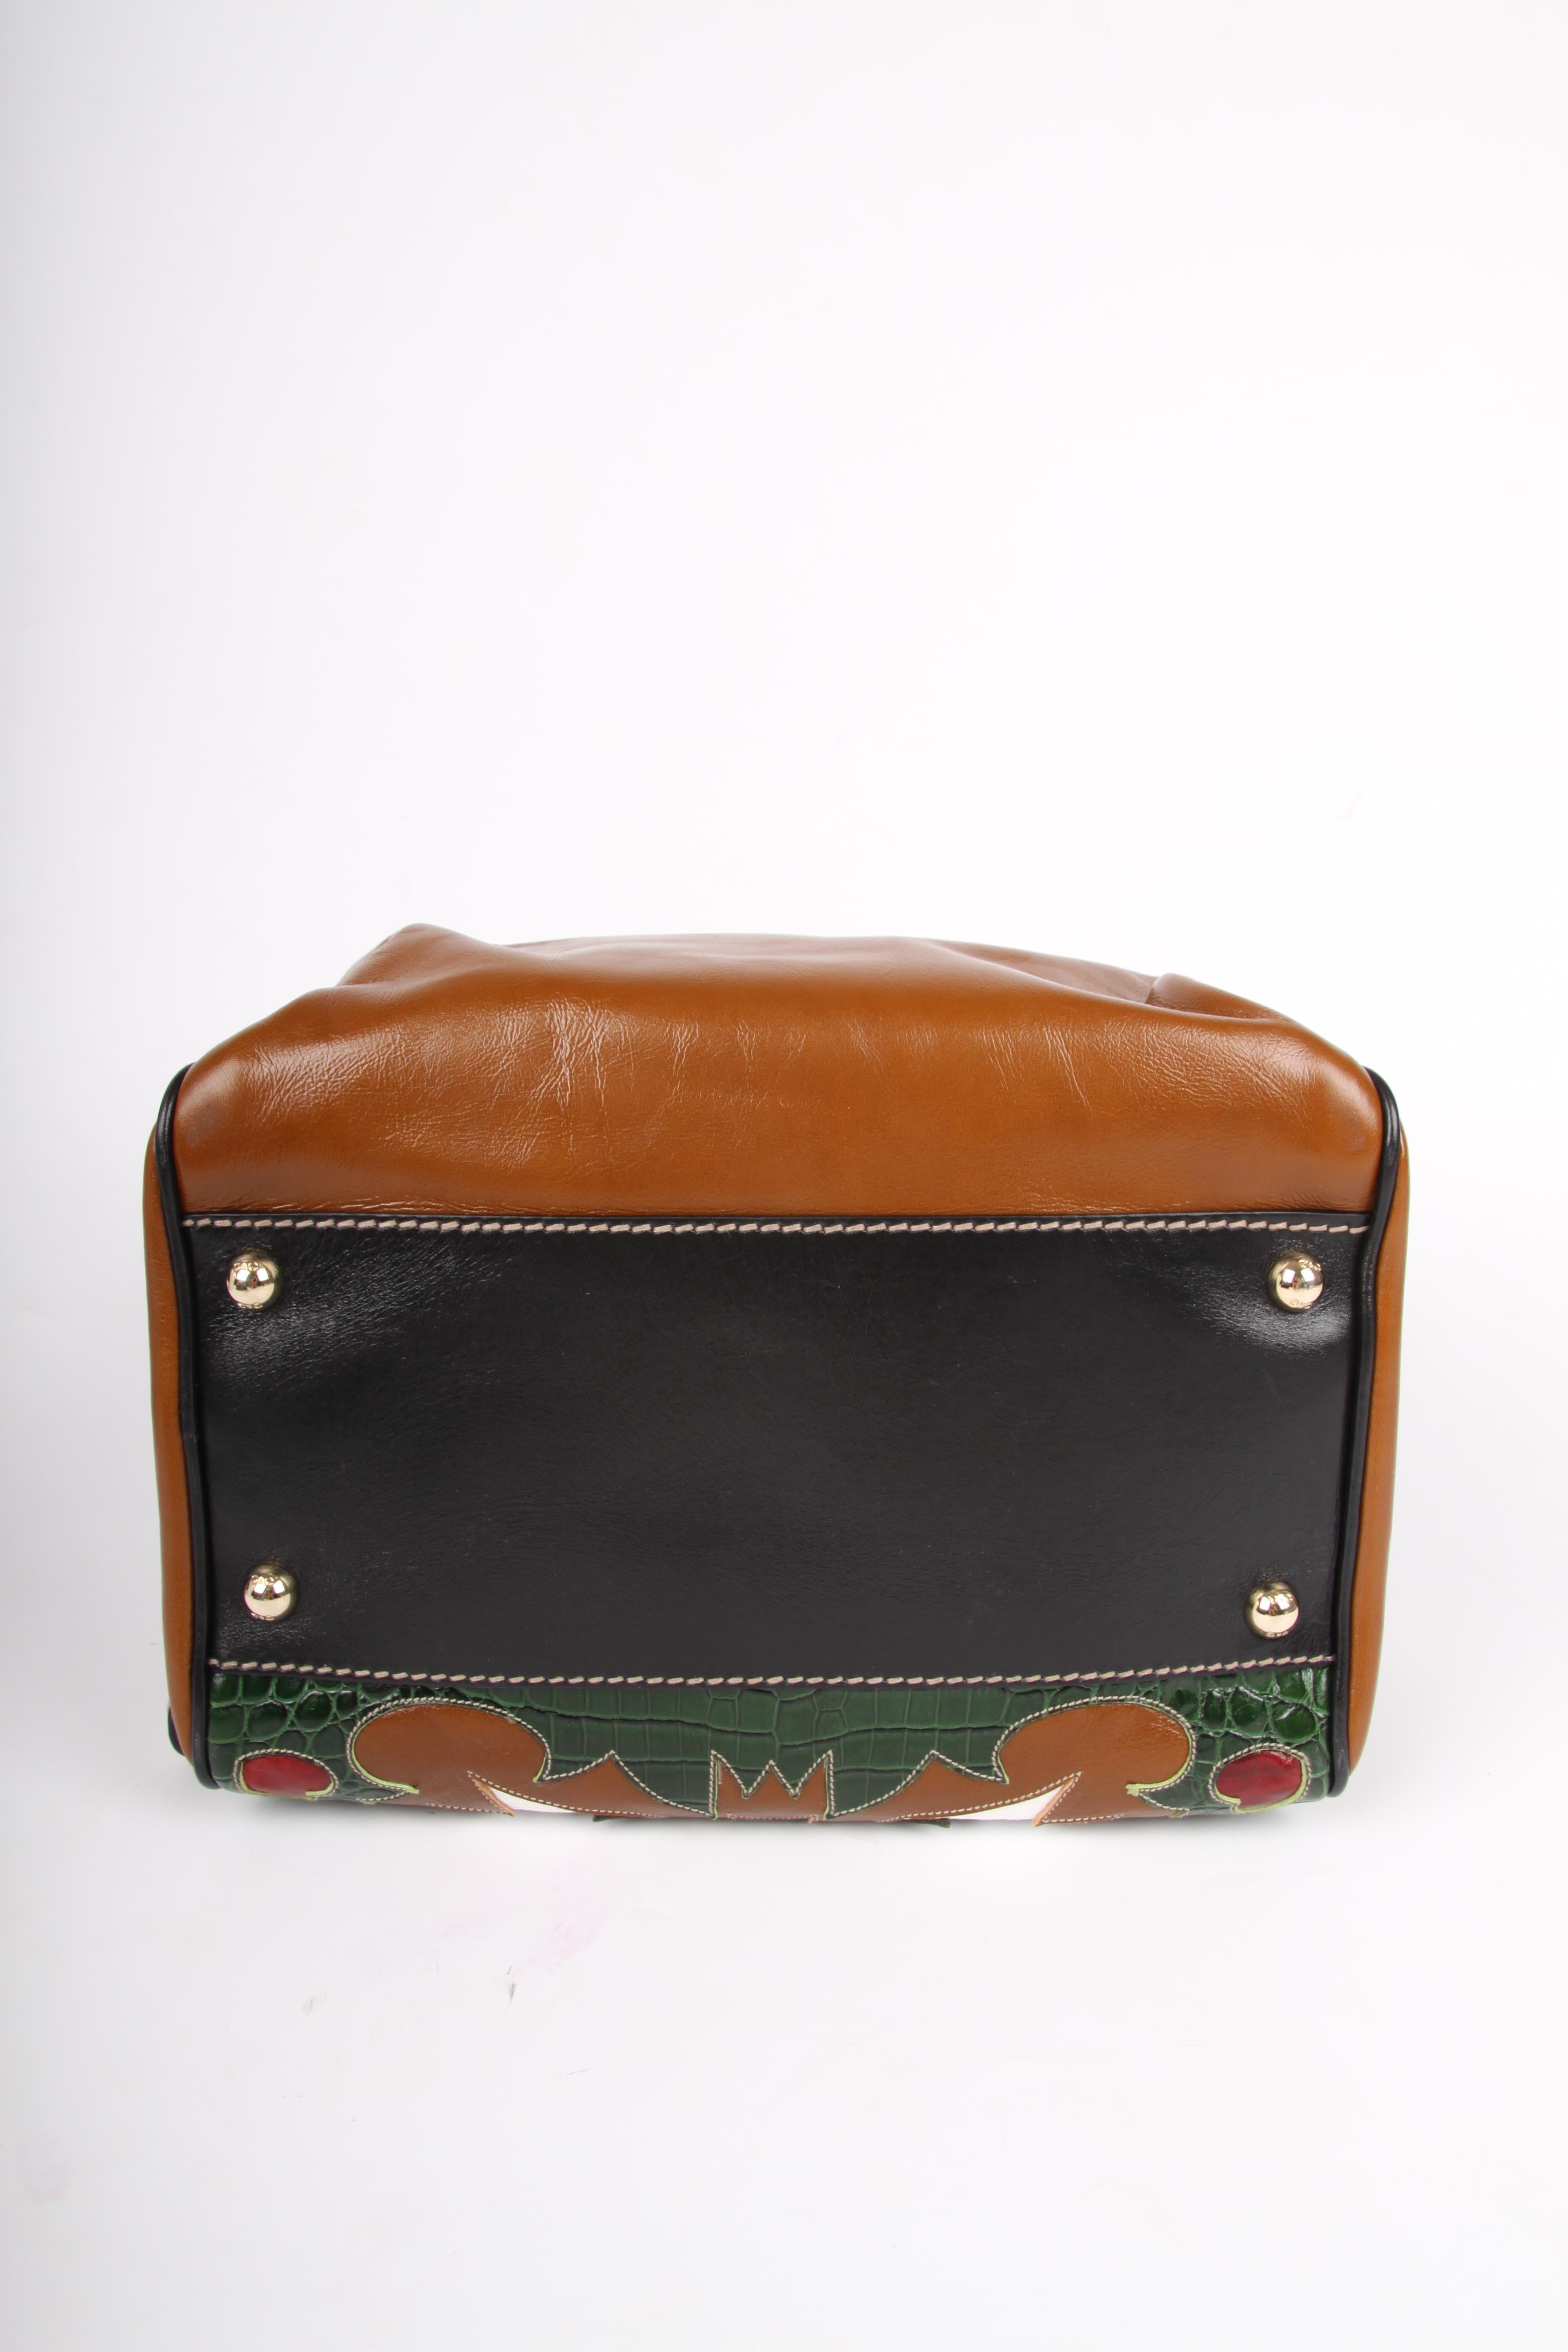 The famous Lily Bag by Dolce & Gabbana in Rodeo style.

The foundation is made of cognac coloured leather, top closure with as much as five gold-tone zipper. The front is very special: beautifully stitched patchwork with the picture of an eagle and